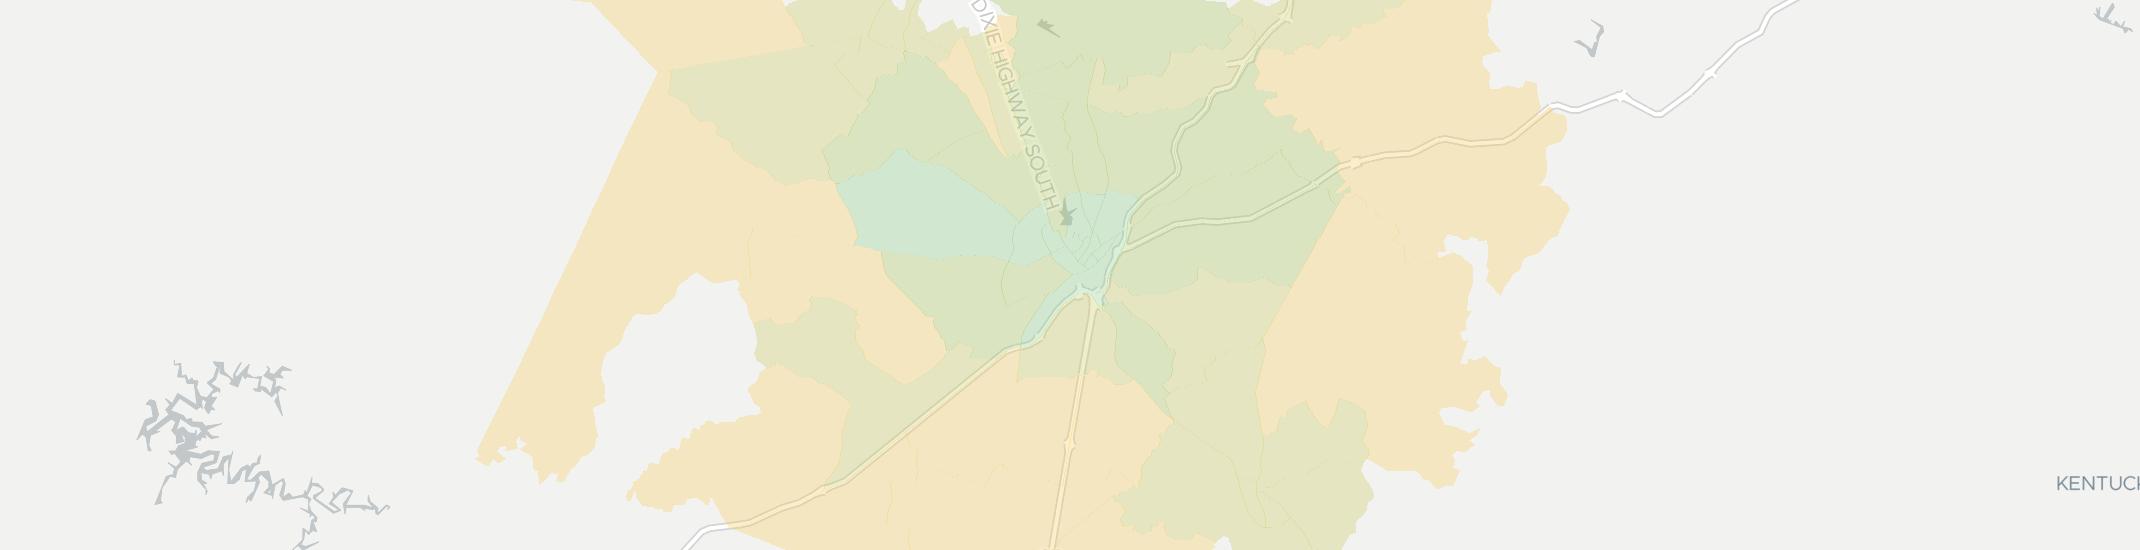 Elizabethtown Internet Competition Map. Click for interactive map